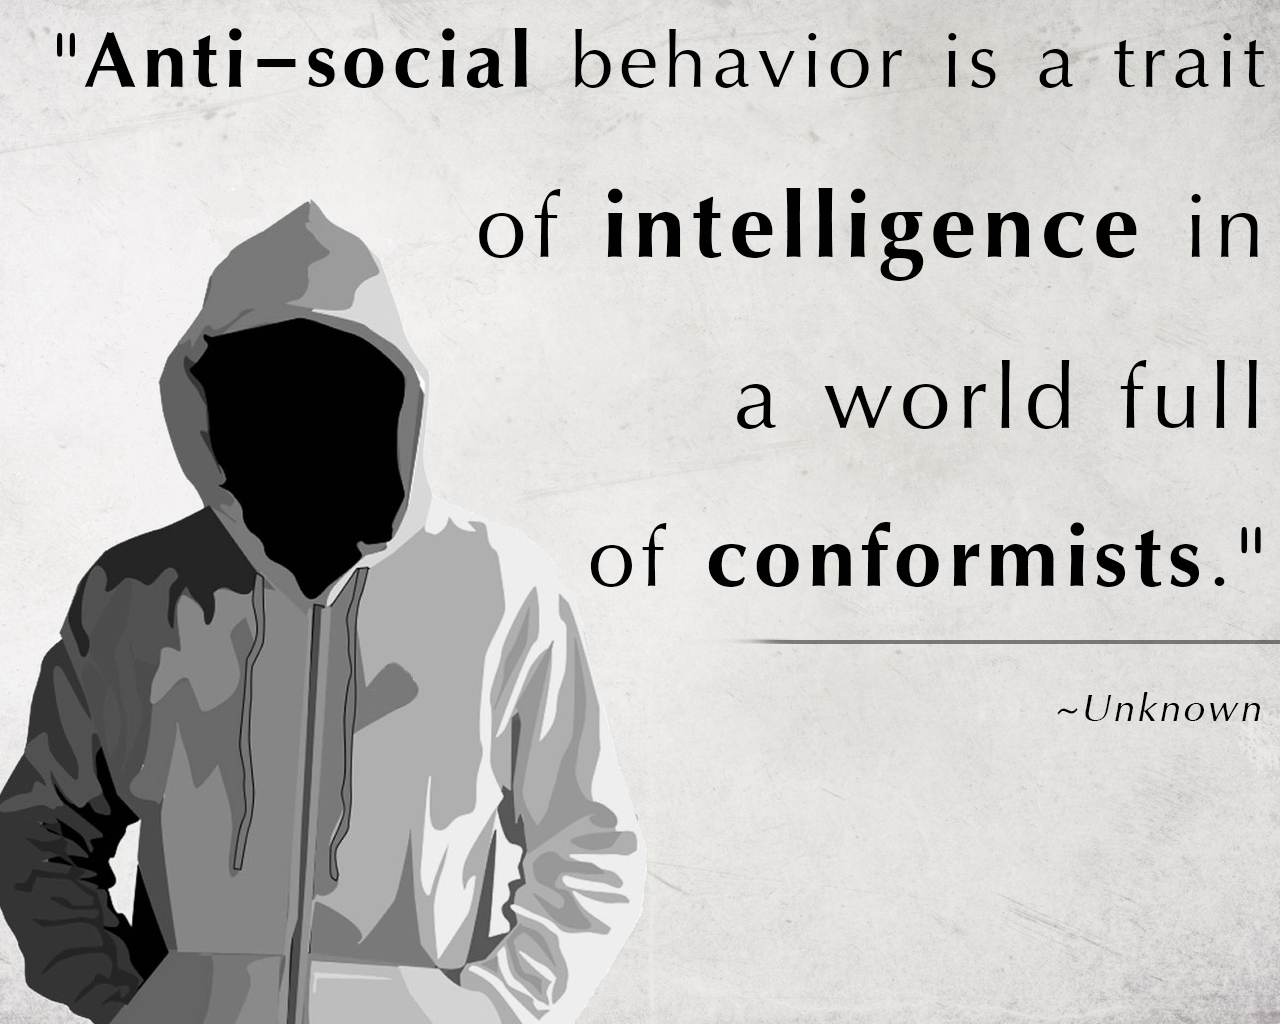 Anti-social behavior is a trait of intelligence in a world full of conformists